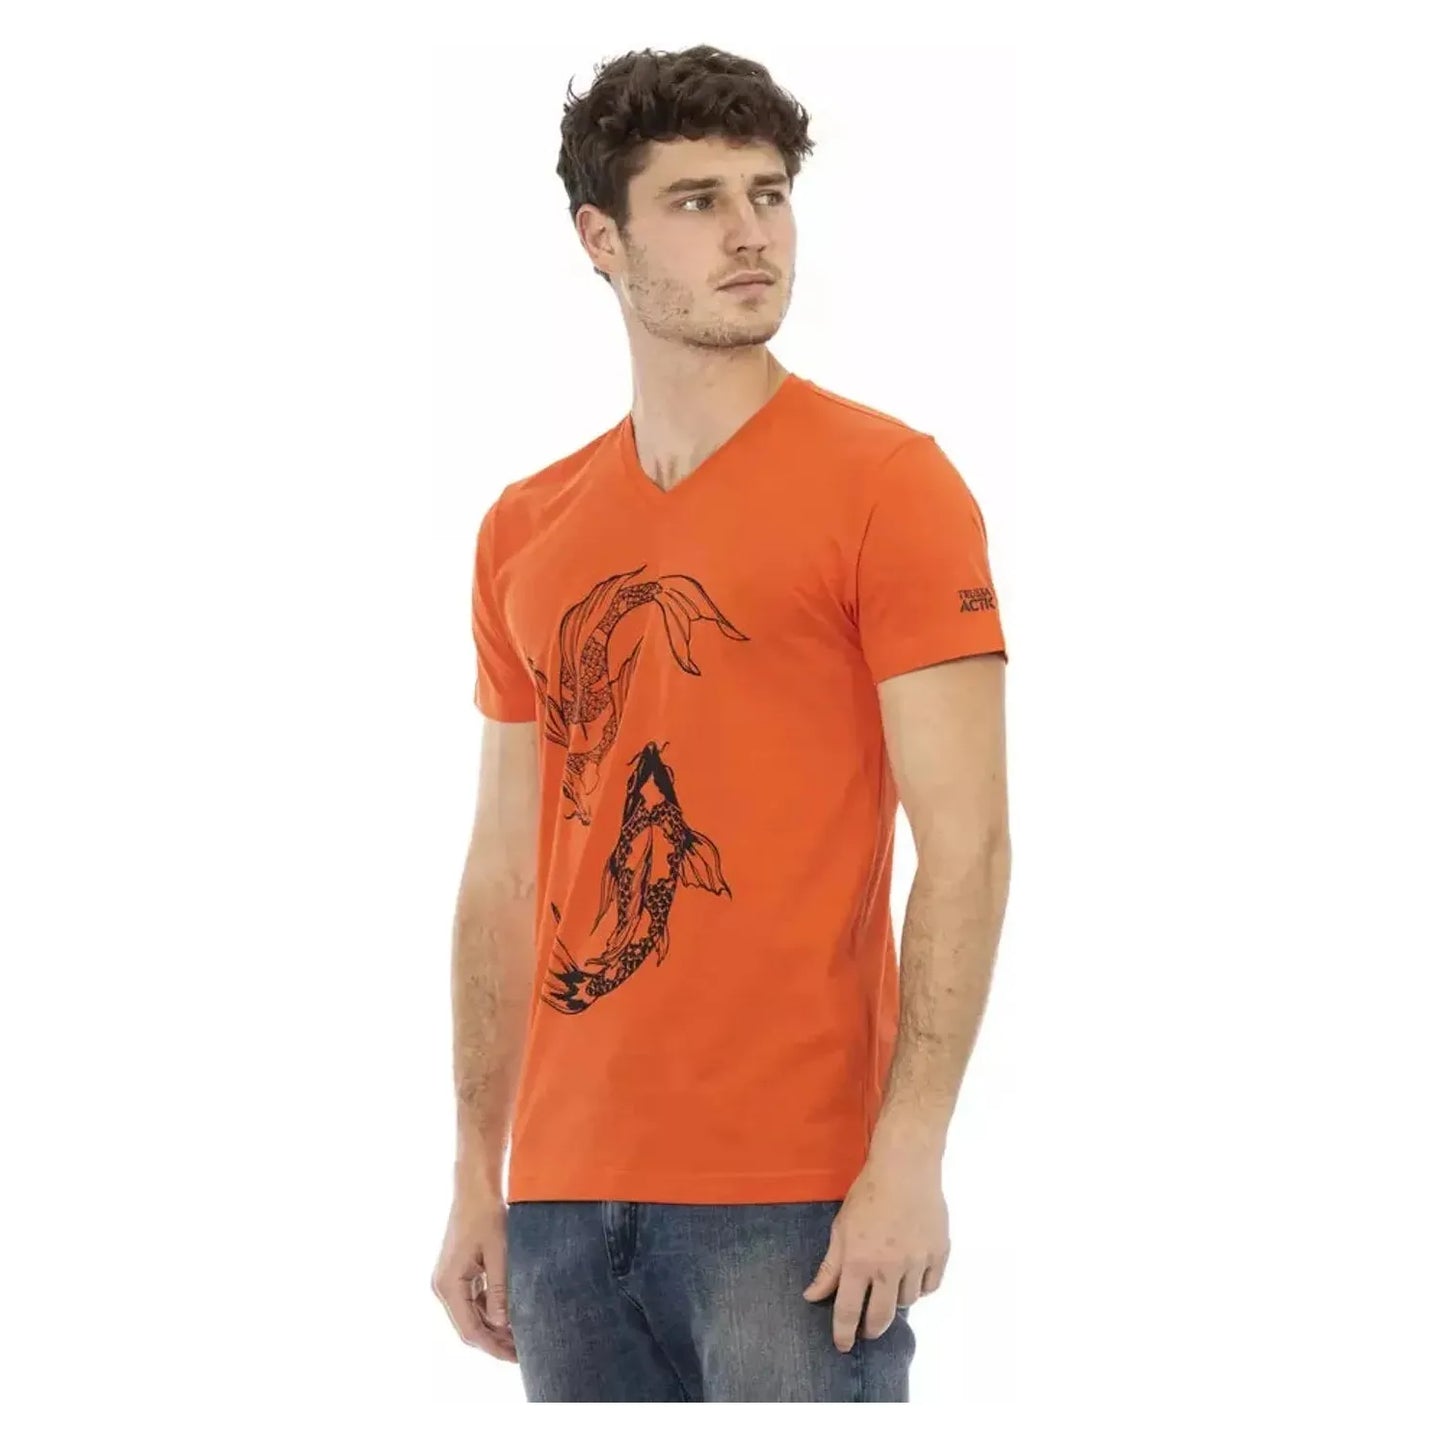 Trussardi Action Vibrant Red V-Neck Tee with Front Print red-cotton-t-shirt-5 product-22840-1006391029-21-f46a4bb9-b32.webp